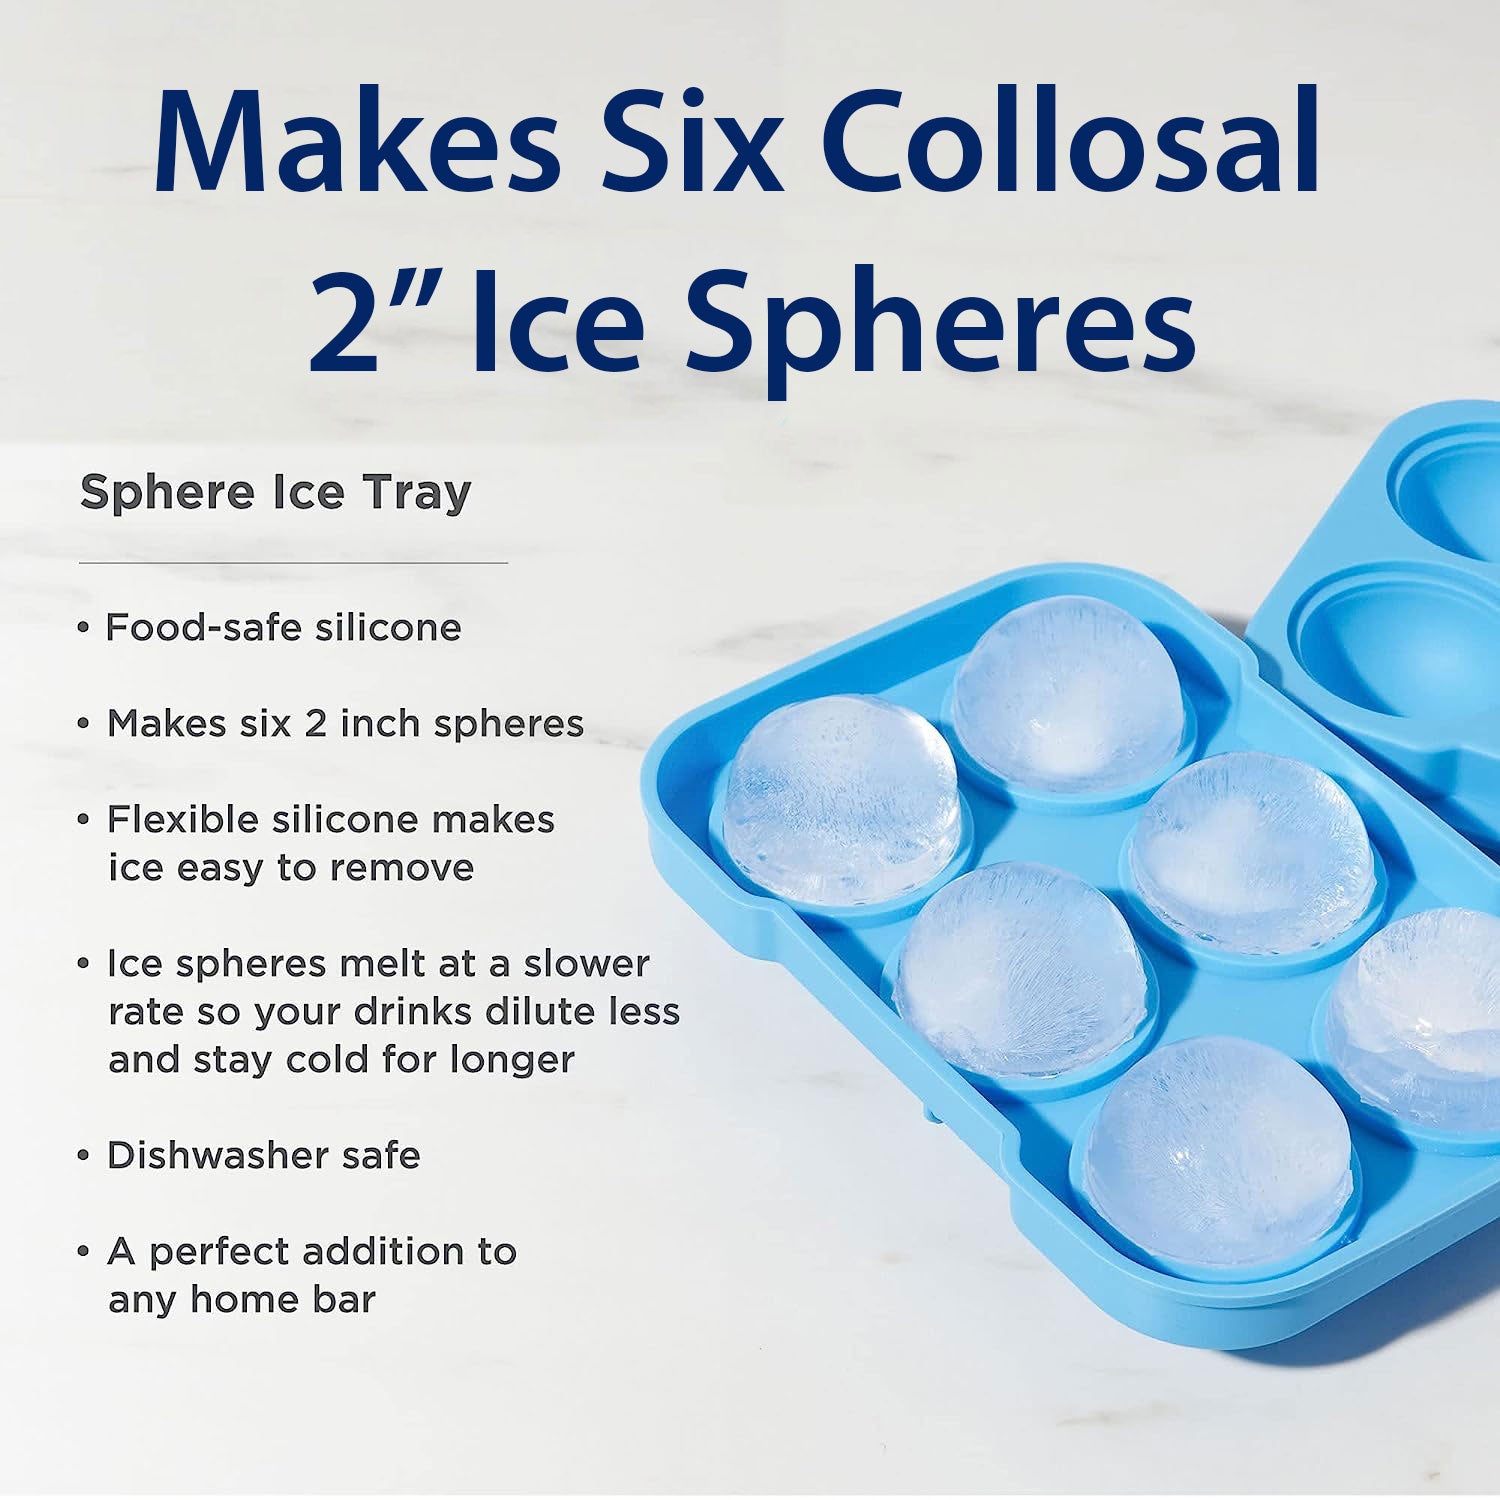 Urban Bar Silicone Ice Cube Tray - Holds 4 Cubes